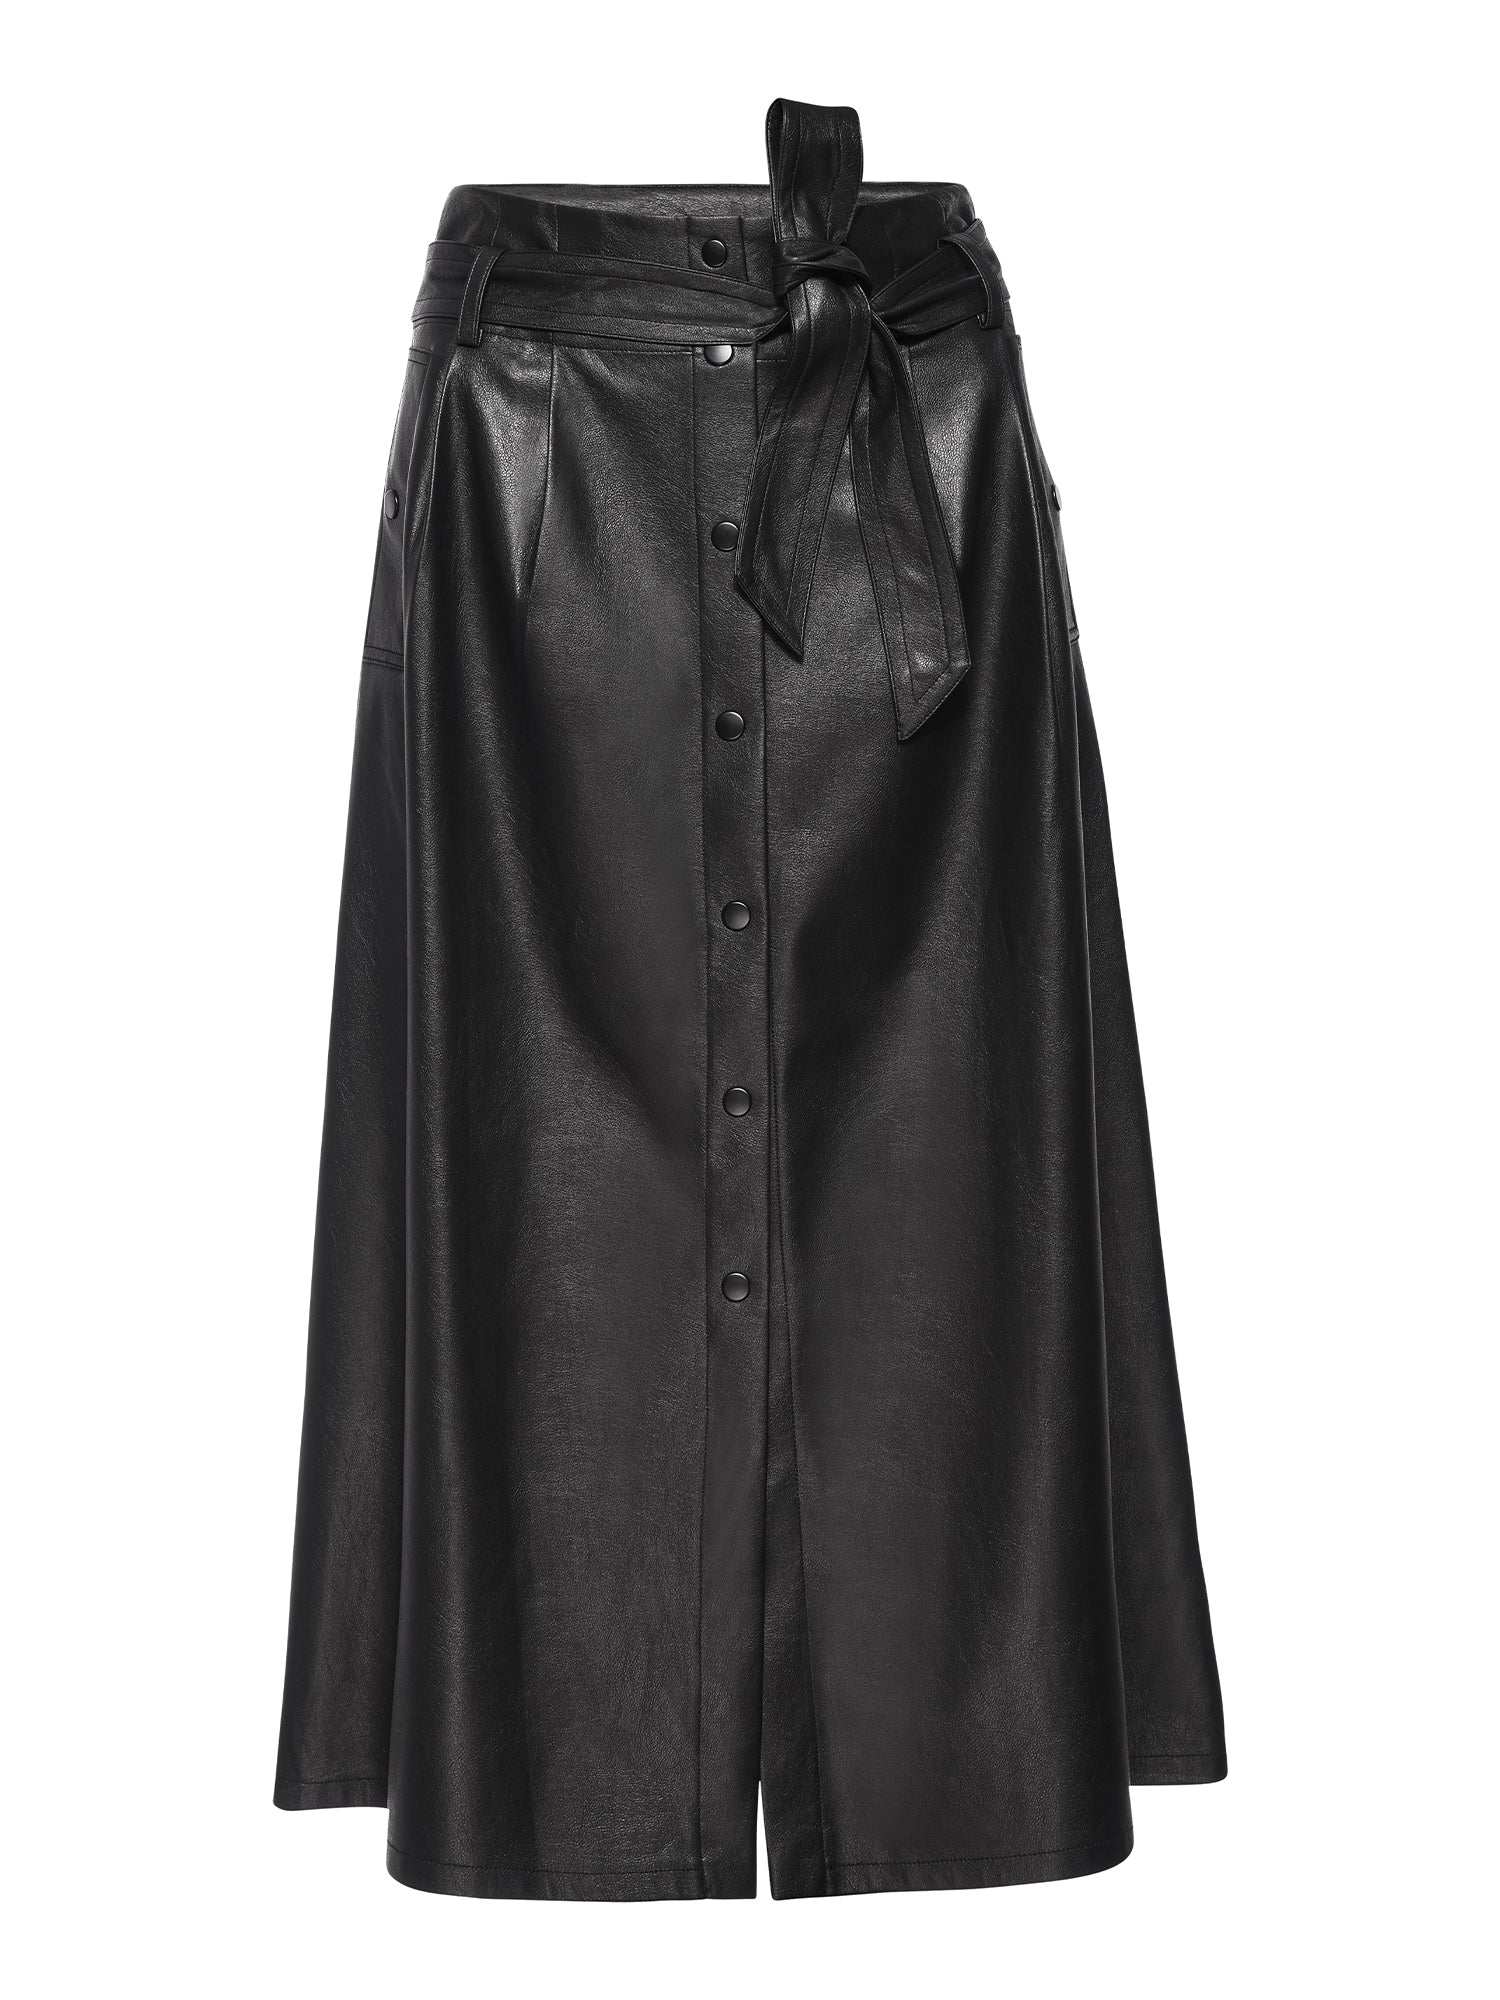 Teagan vegan leather black belted button front midi skirt flat view